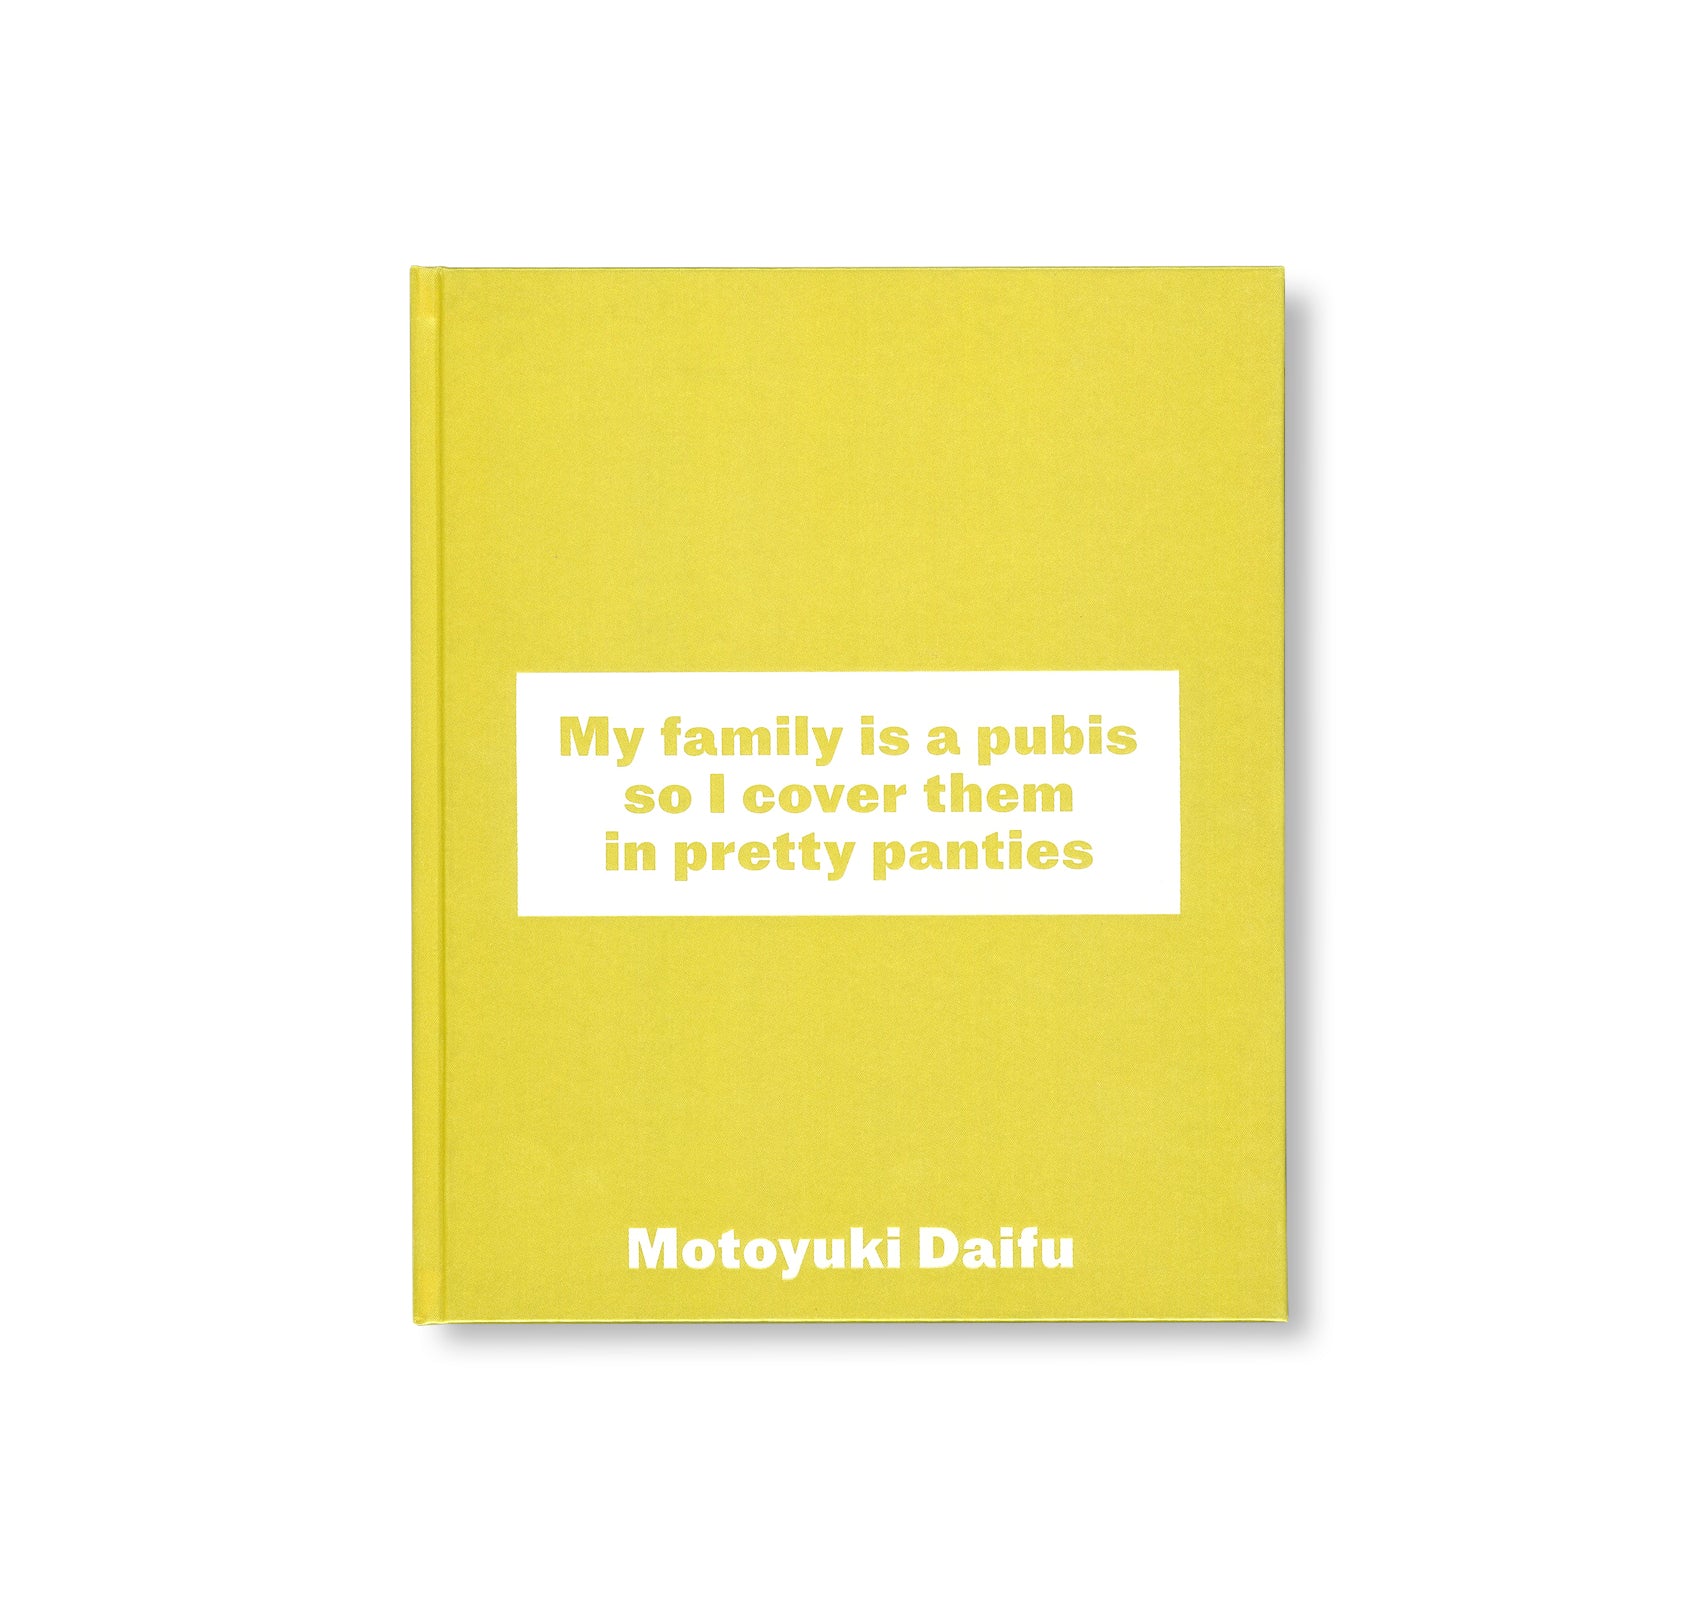 MY FAMILY IS A PUBIS SO I COVER THEM IN PRETTY PANTIES by Motoyuki Daifu [SIGNED]